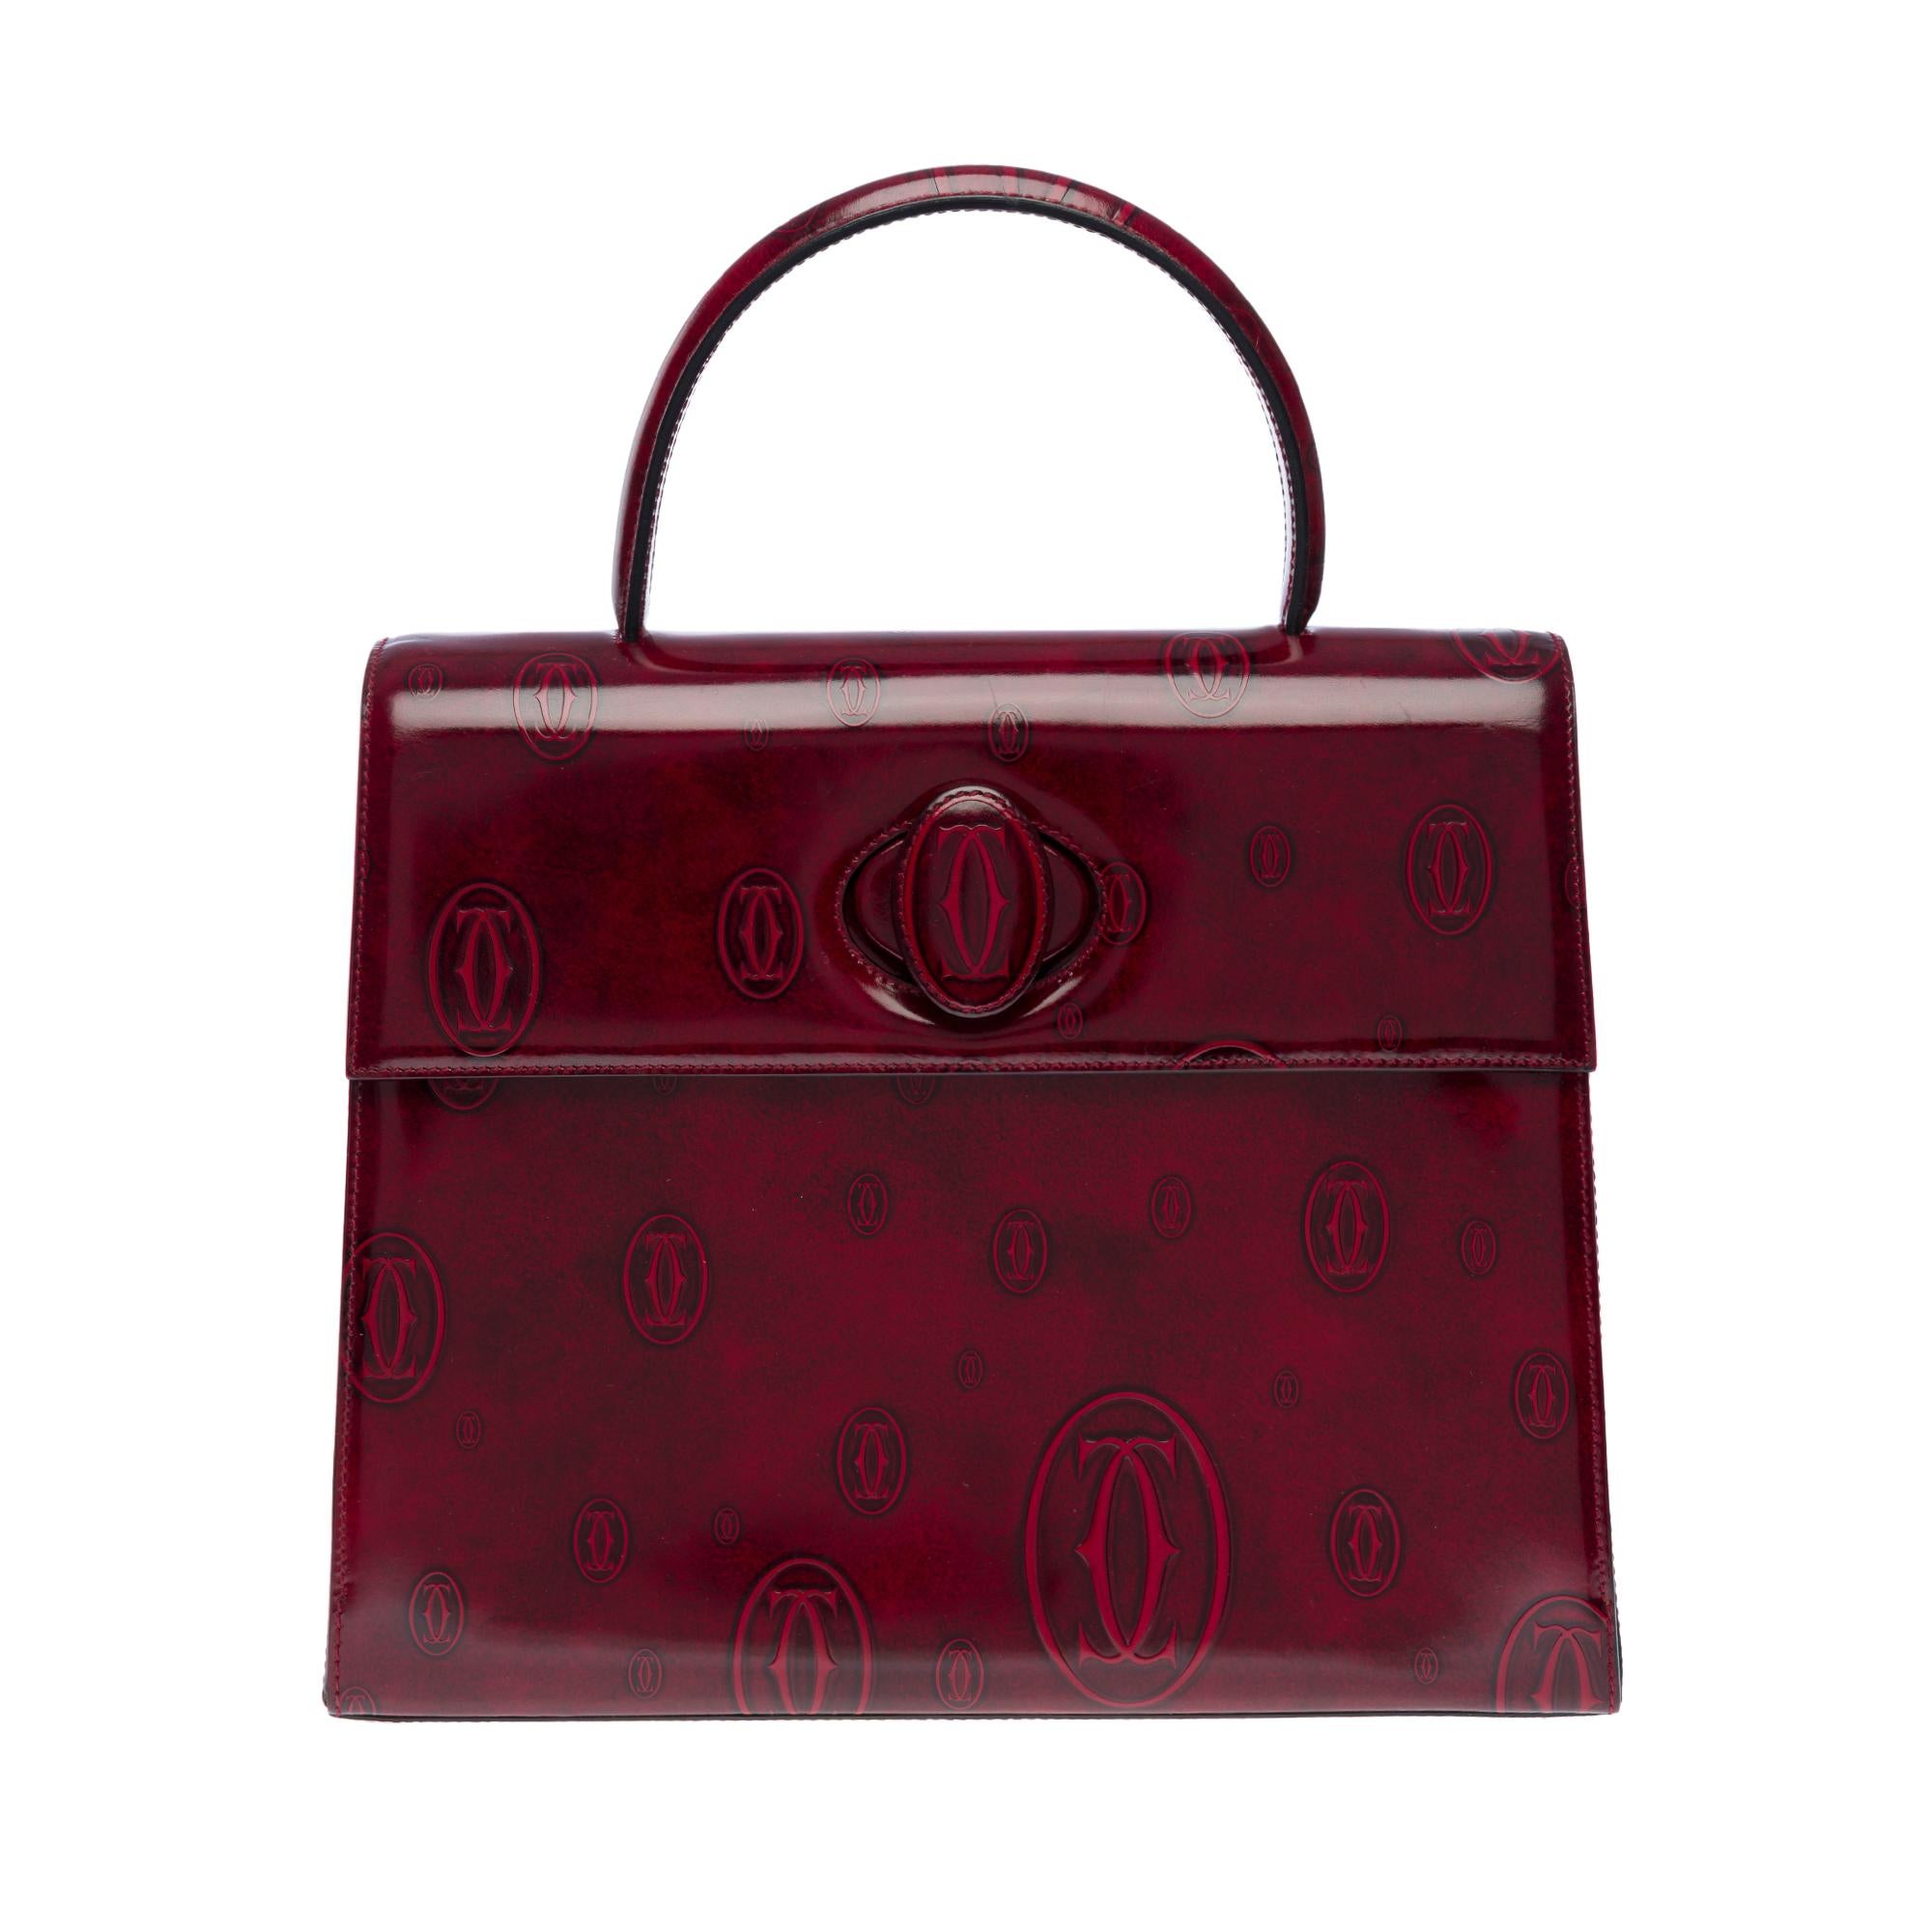 Gorgeous​ ​Collector​ ​Cartier​ ​«Happy​ ​Birthday»​ ​vintage​ ​burgundy​ ​patent​ ​leather​ ​with​ ​a​ ​rounded​ ​handle​ ​for​ ​a​ ​hand​ ​carry

A​ ​latch​ ​closure
Interior​ ​lining​ ​in​ ​burgundy​ ​patent​ ​leather​ ​and​ ​printed​ ​fabric,​